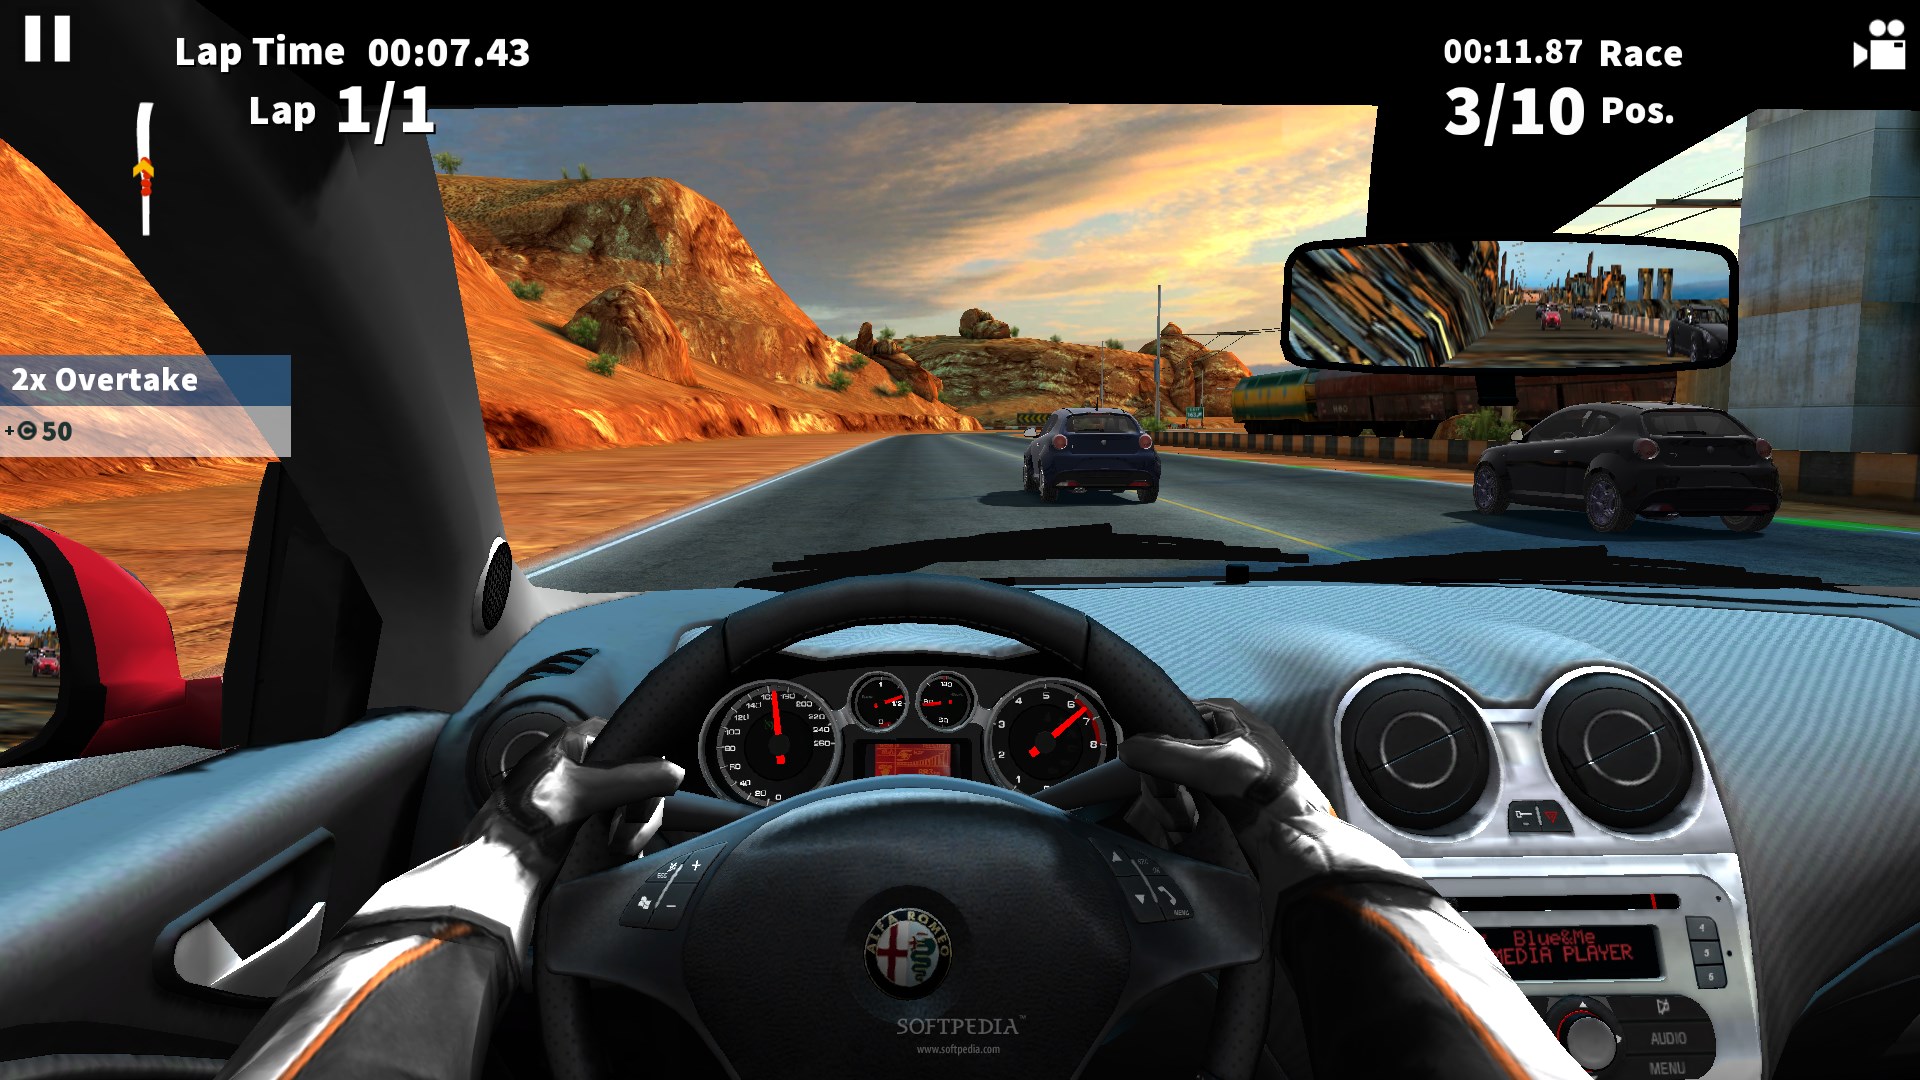 gt racing 2 the real car experience purchase code